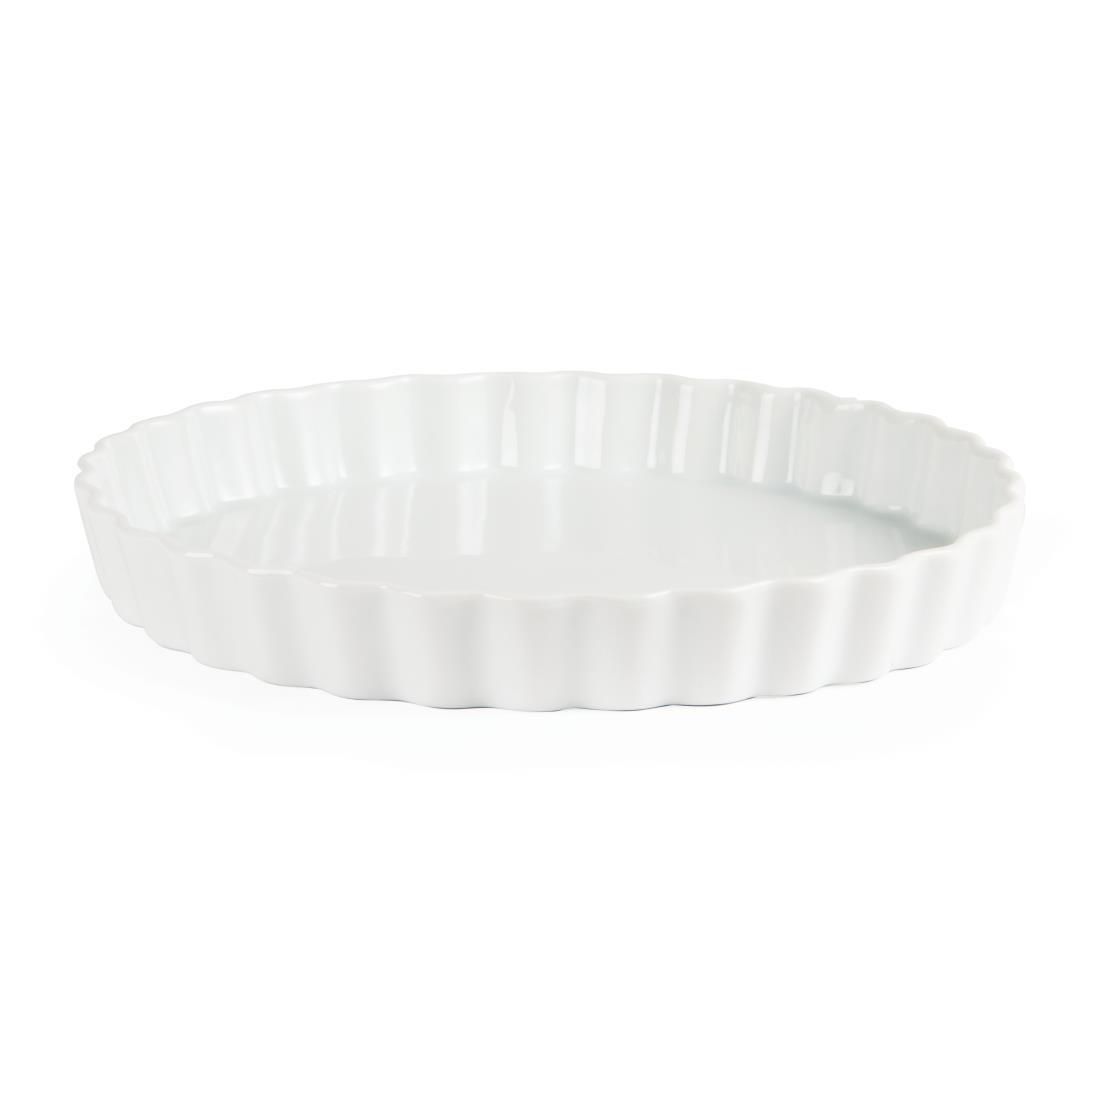 Olympia Whiteware Flan Dishes 265mm (Pack of 6) - W449  - 2